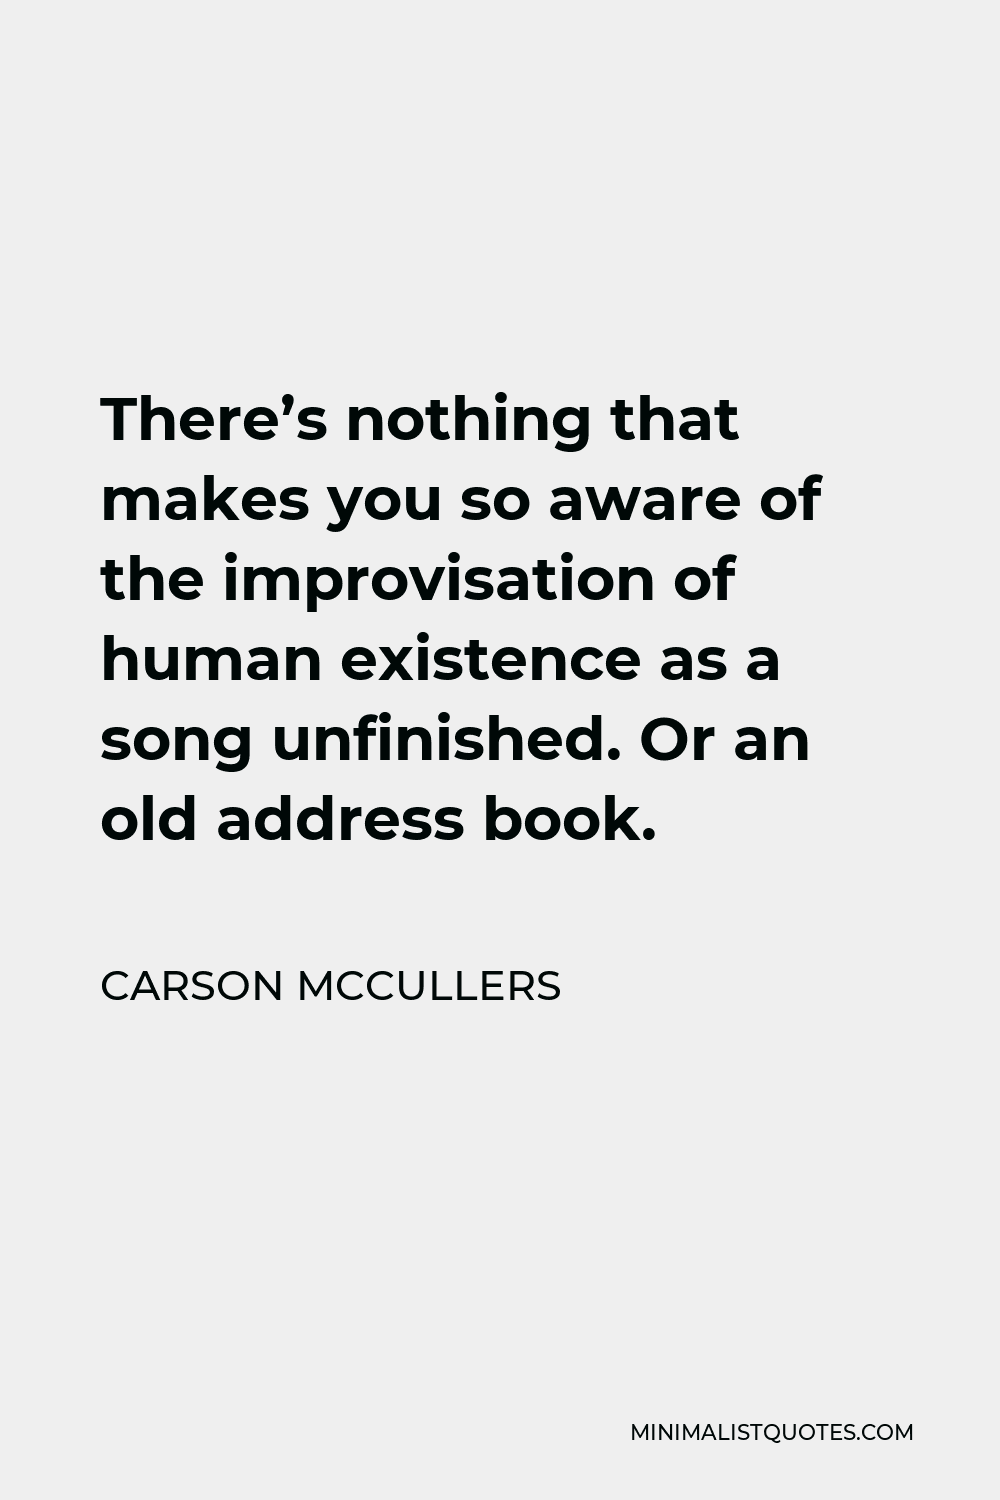 Carson McCullers Quote - There’s nothing that makes you so aware of the improvisation of human existence as a song unfinished. Or an old address book.